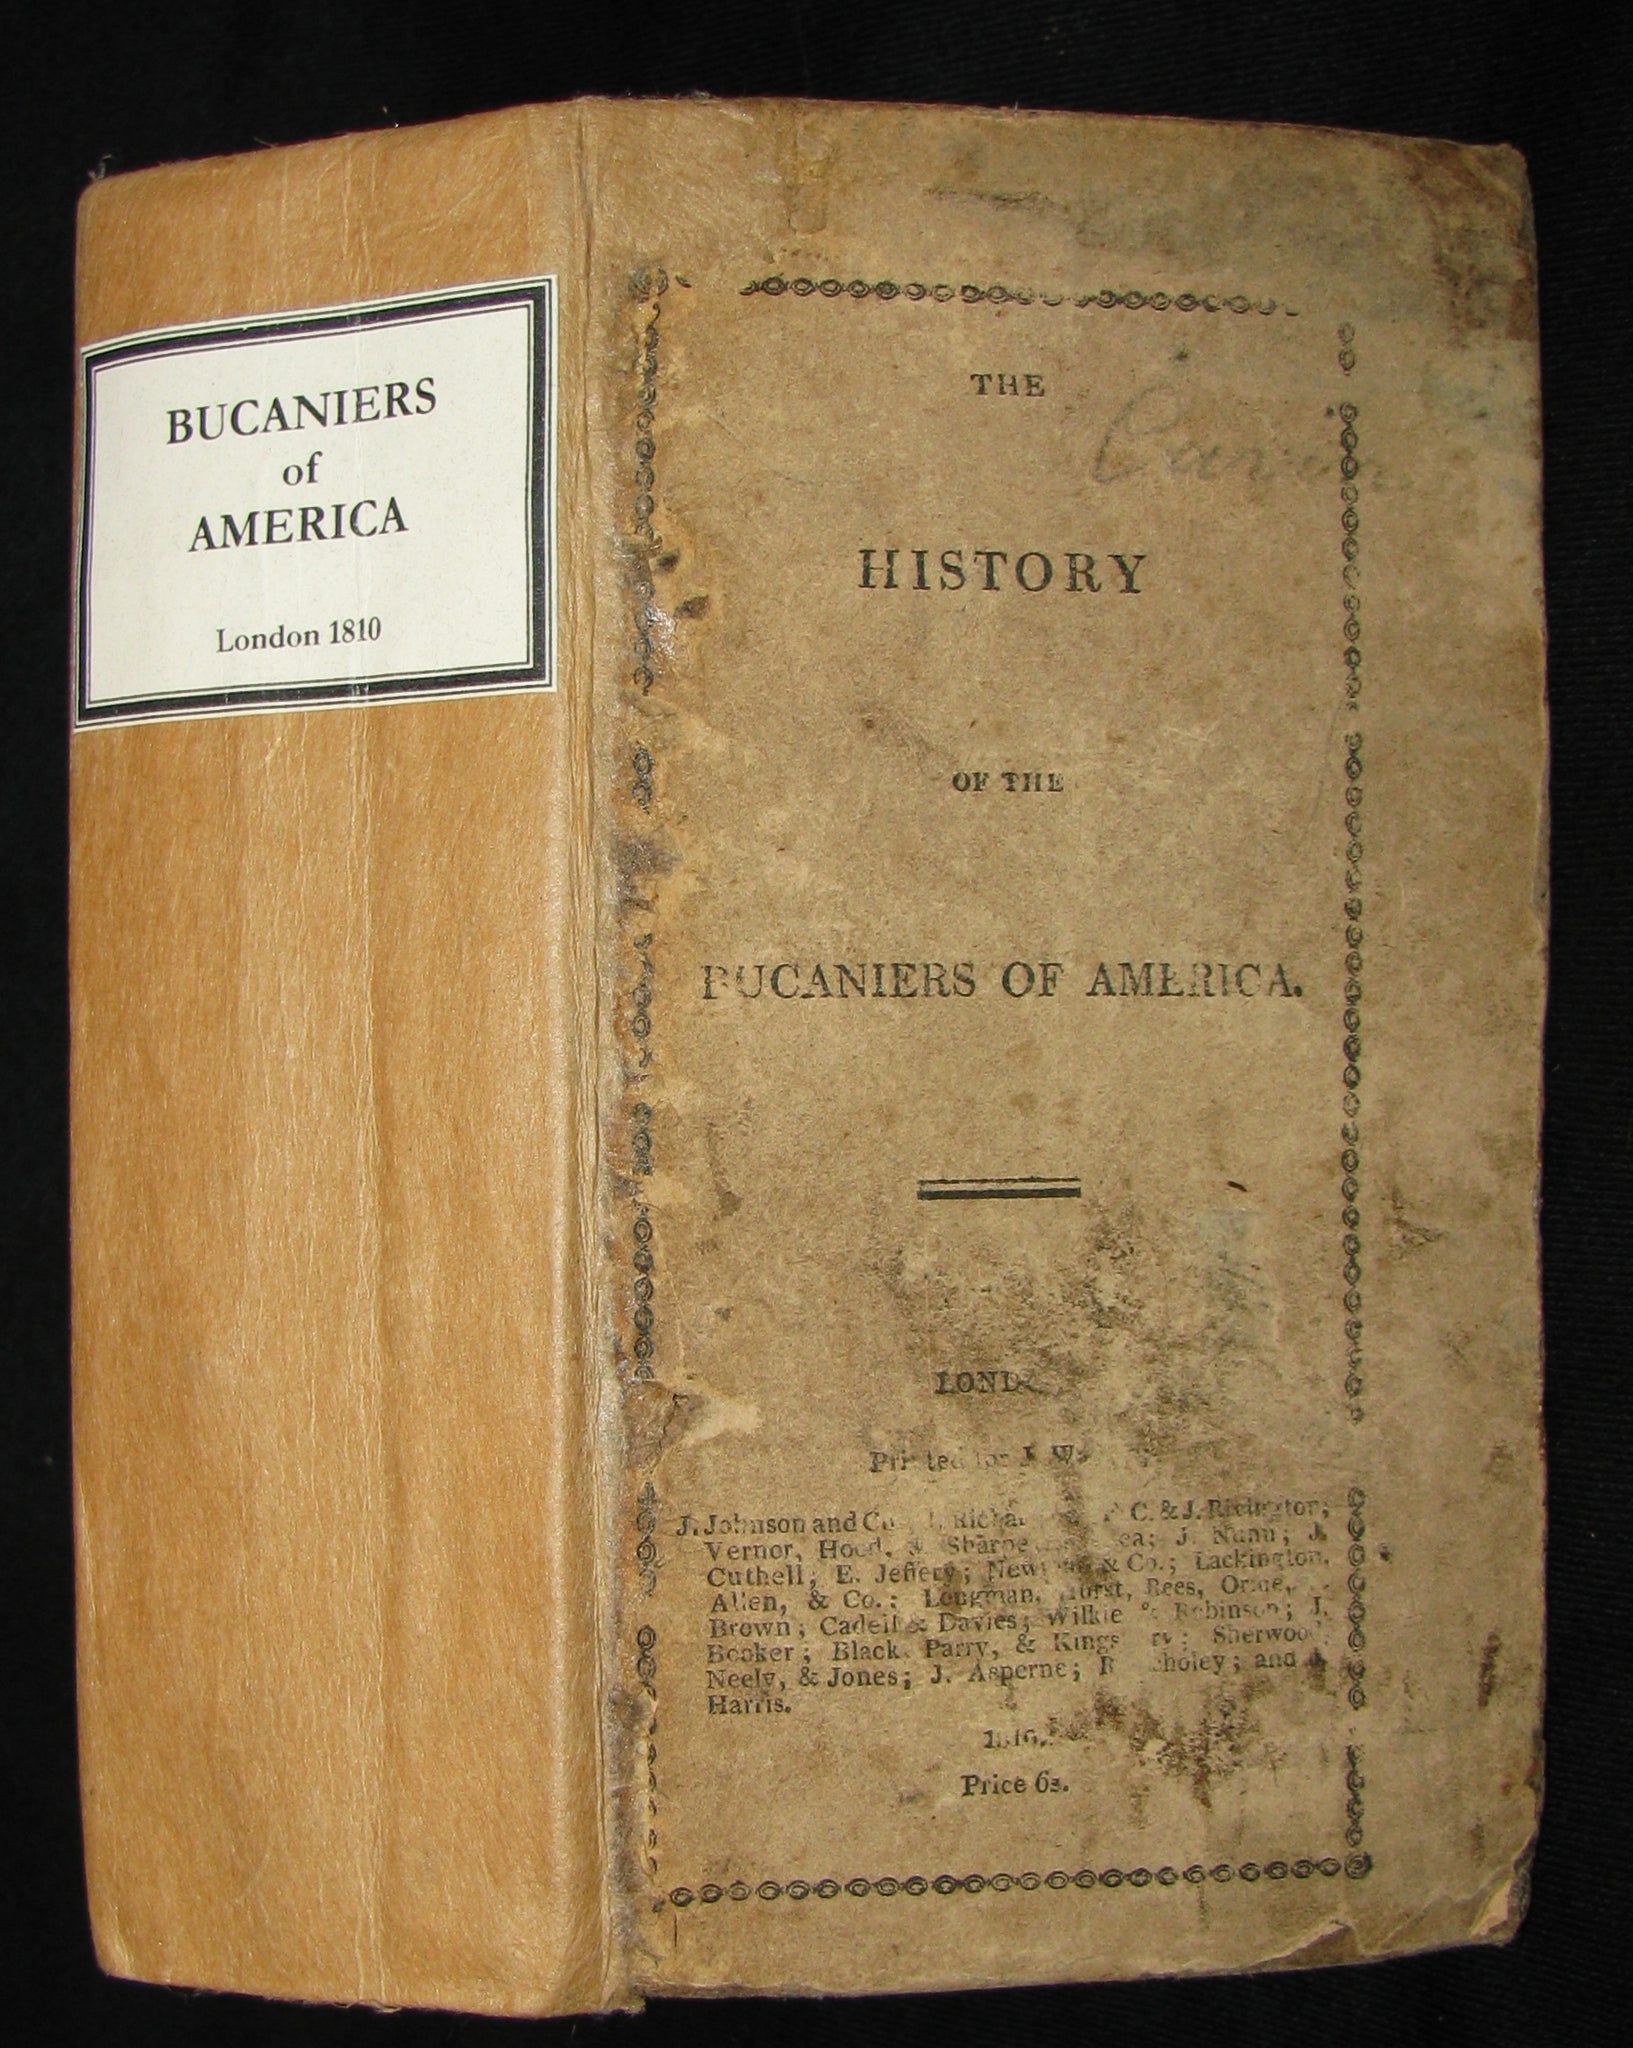 1810 Rare Book - Exquemelin - THE HISTORY OF THE BUCANIERS (BUCCANIERS) OF AMERICA - PIRATES